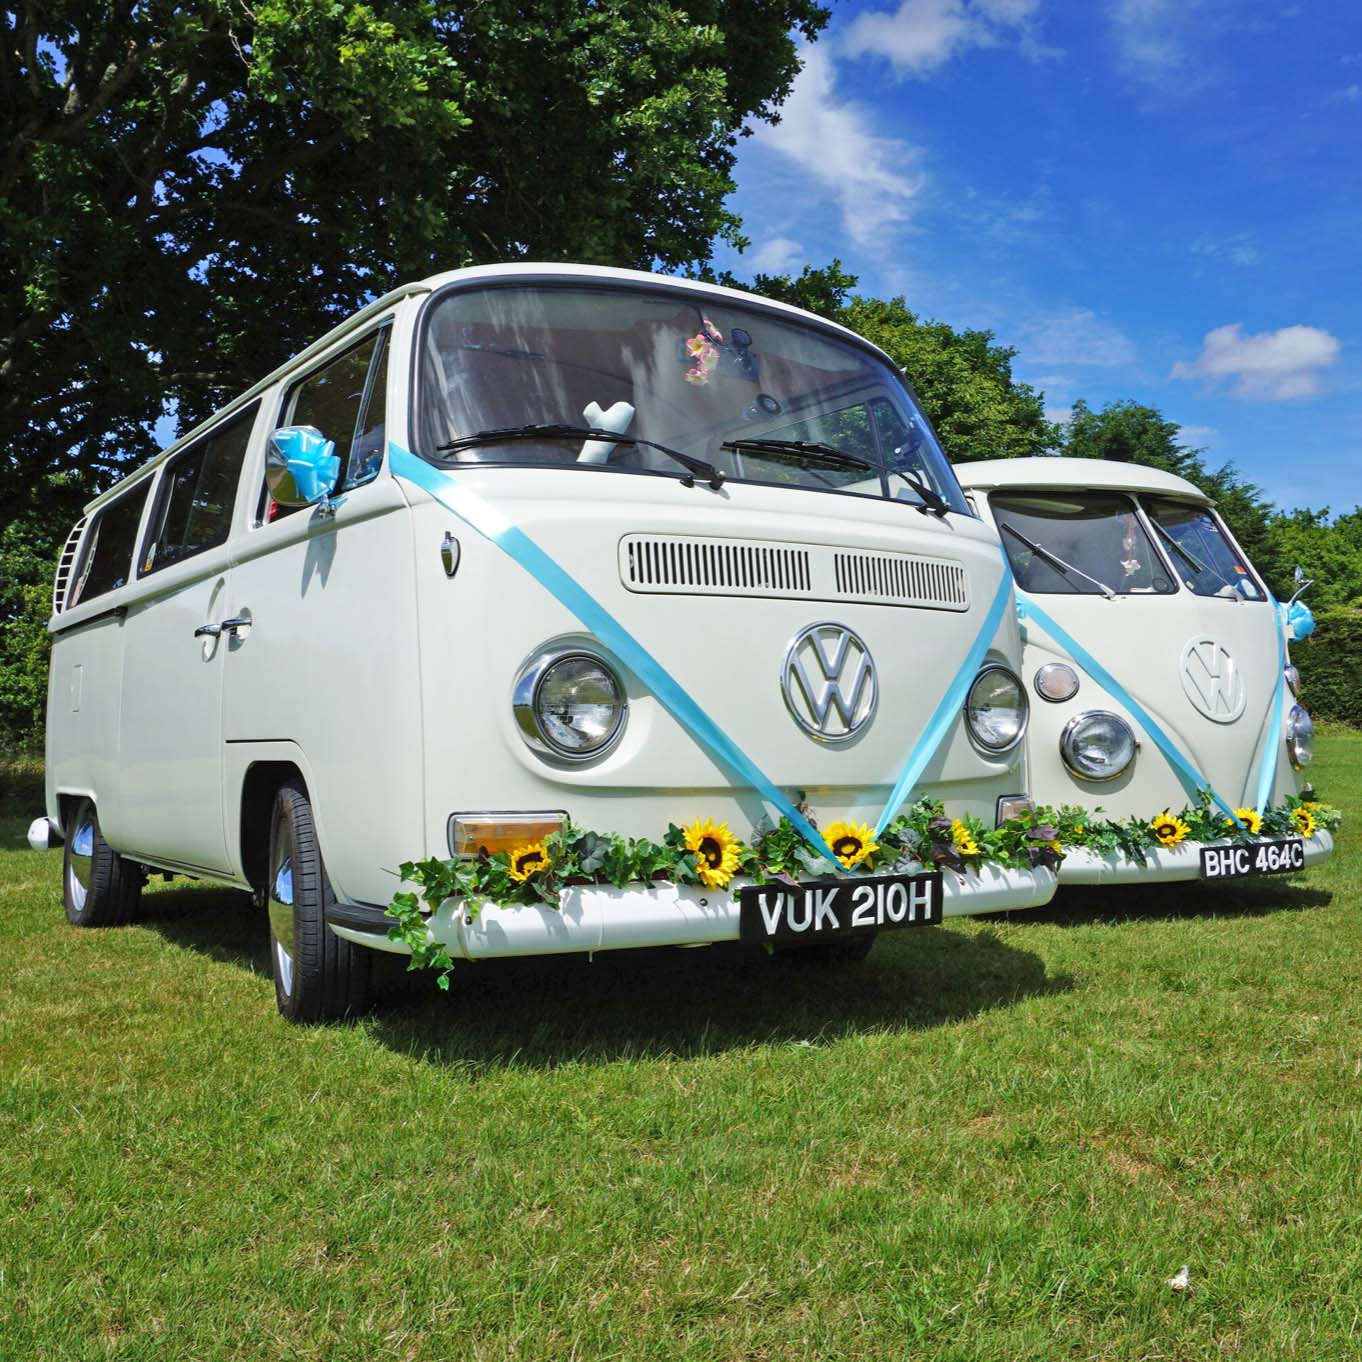 Two Matching Classic VW Campervans dressed with matching turquoise ribbons and flowers.